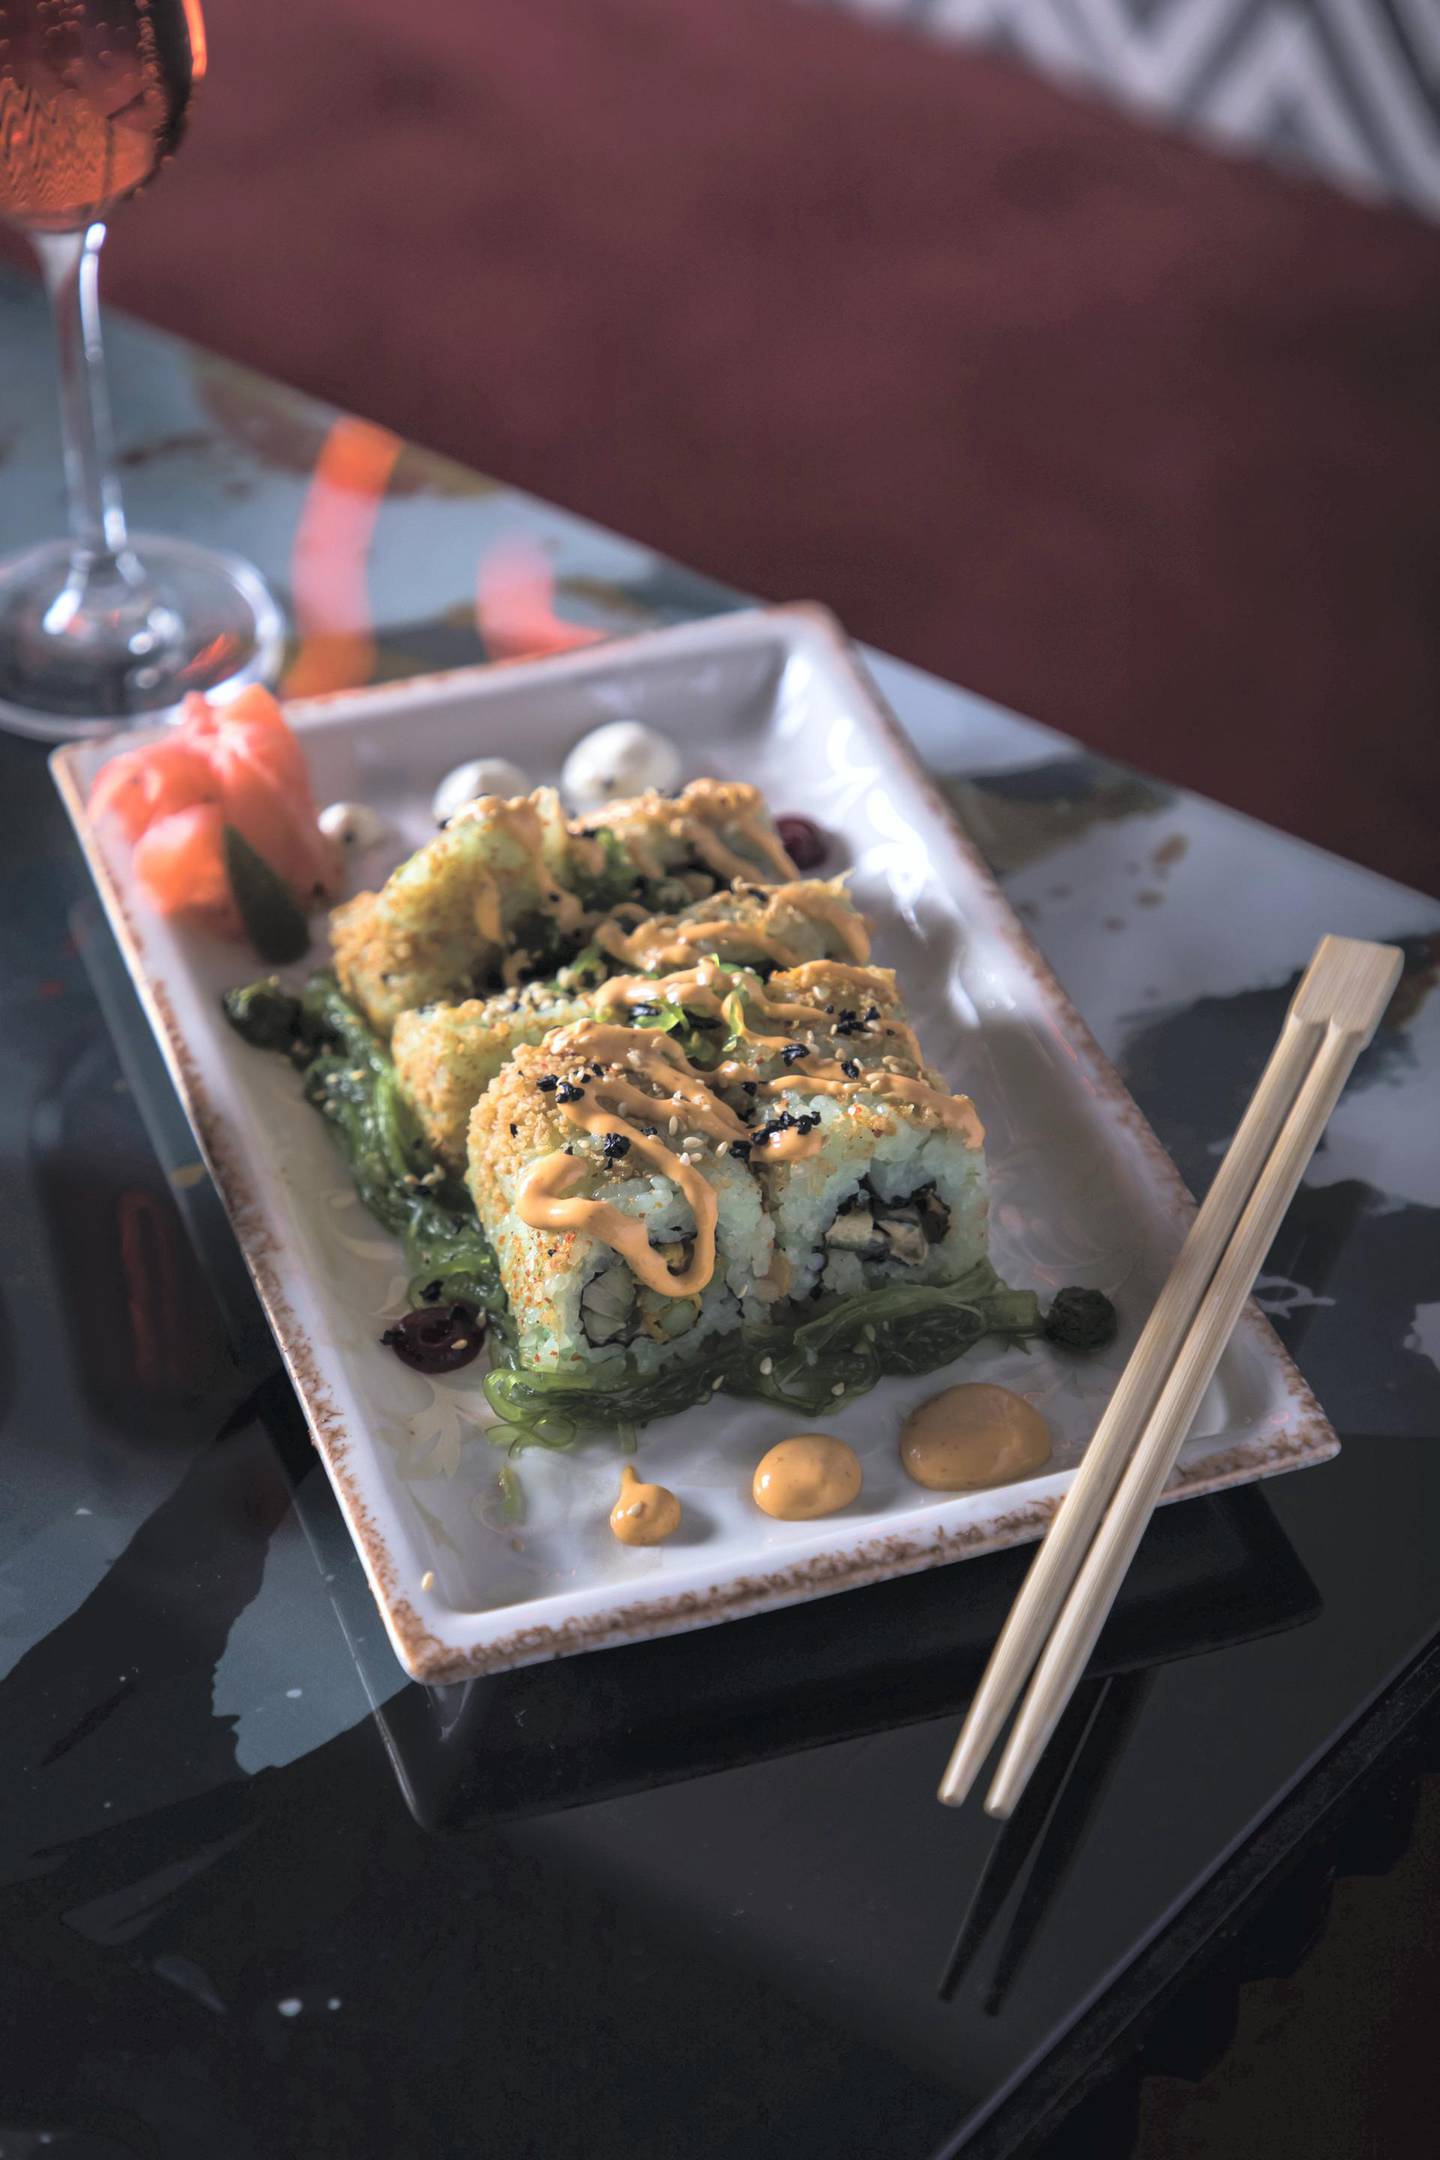 Sushi with asparagus tempura from Epitome. Photo: Epitome